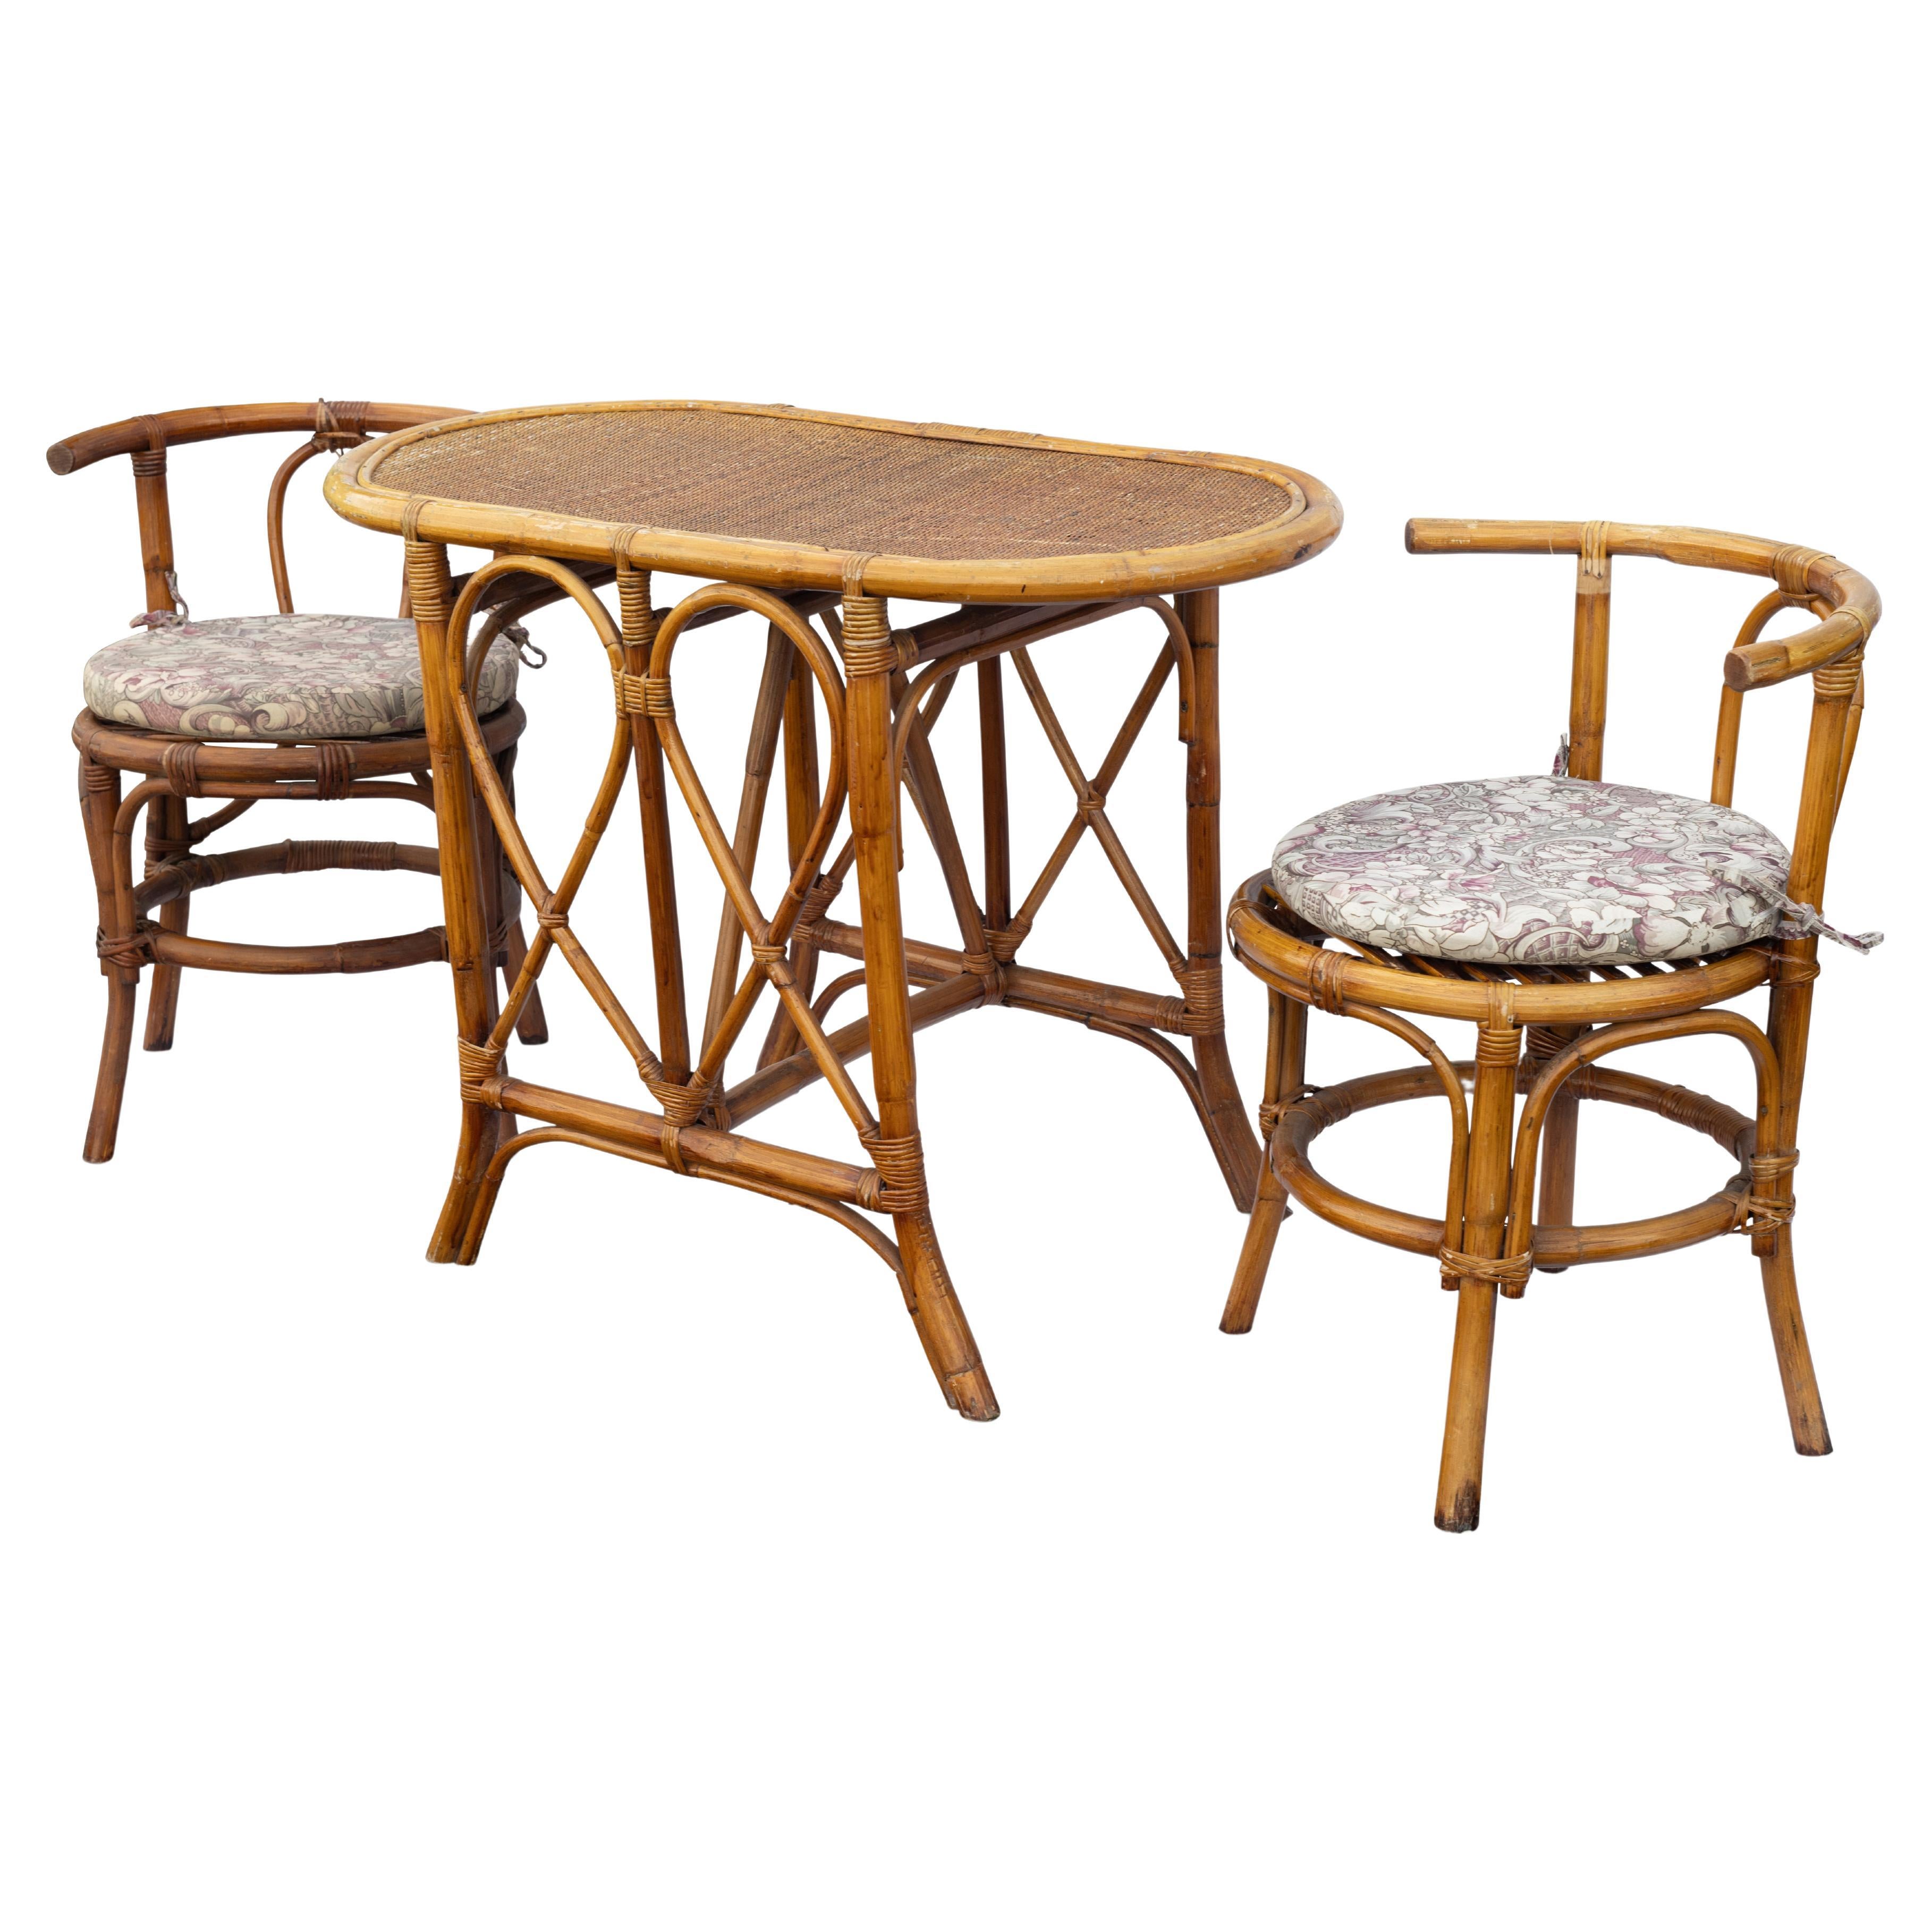 A Bohemian Curved Bamboo & Cane Three Piece Dining Set from Italy, 1950s

Wonderful addition to a contemporary or period garden room, with stow away seats for practicality. 

Bamboo furniture is always fun & endures time, styles and trends.